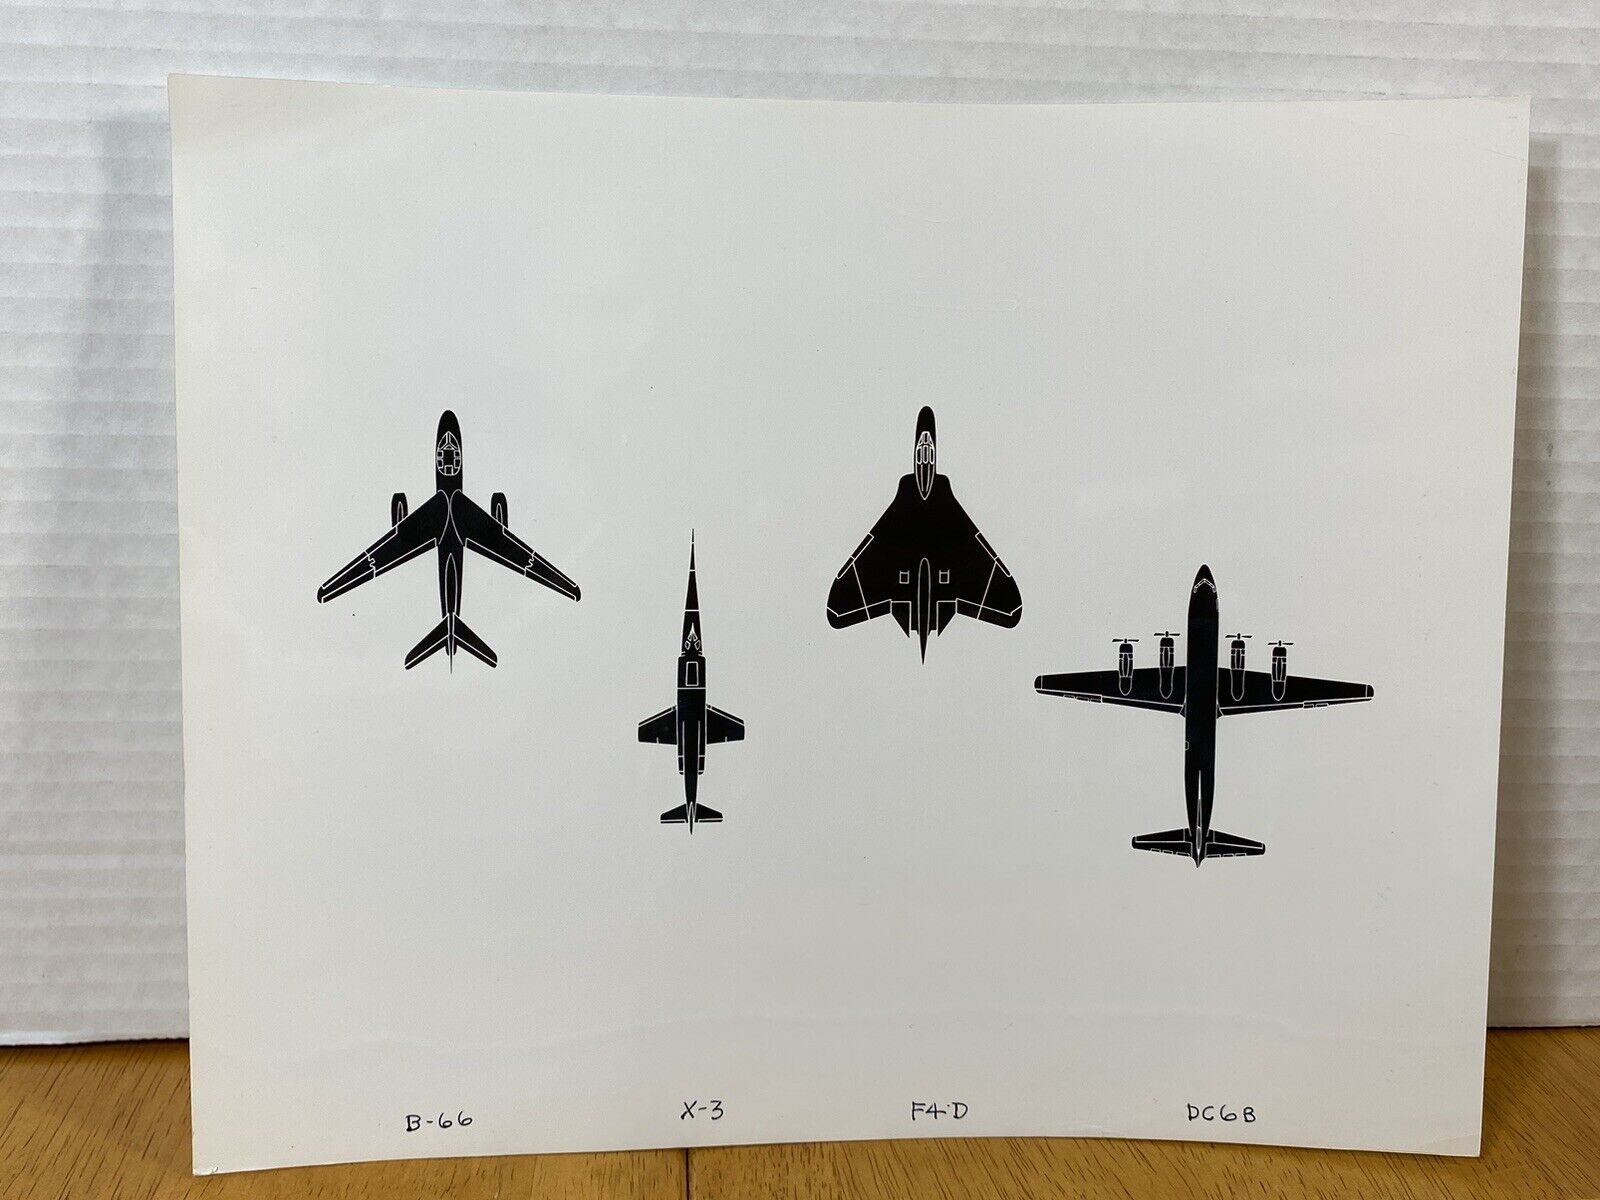 Picture Of B-66/X-3/F4D/DC6B Aircraft’s . Writing On The Back RAP 27-213